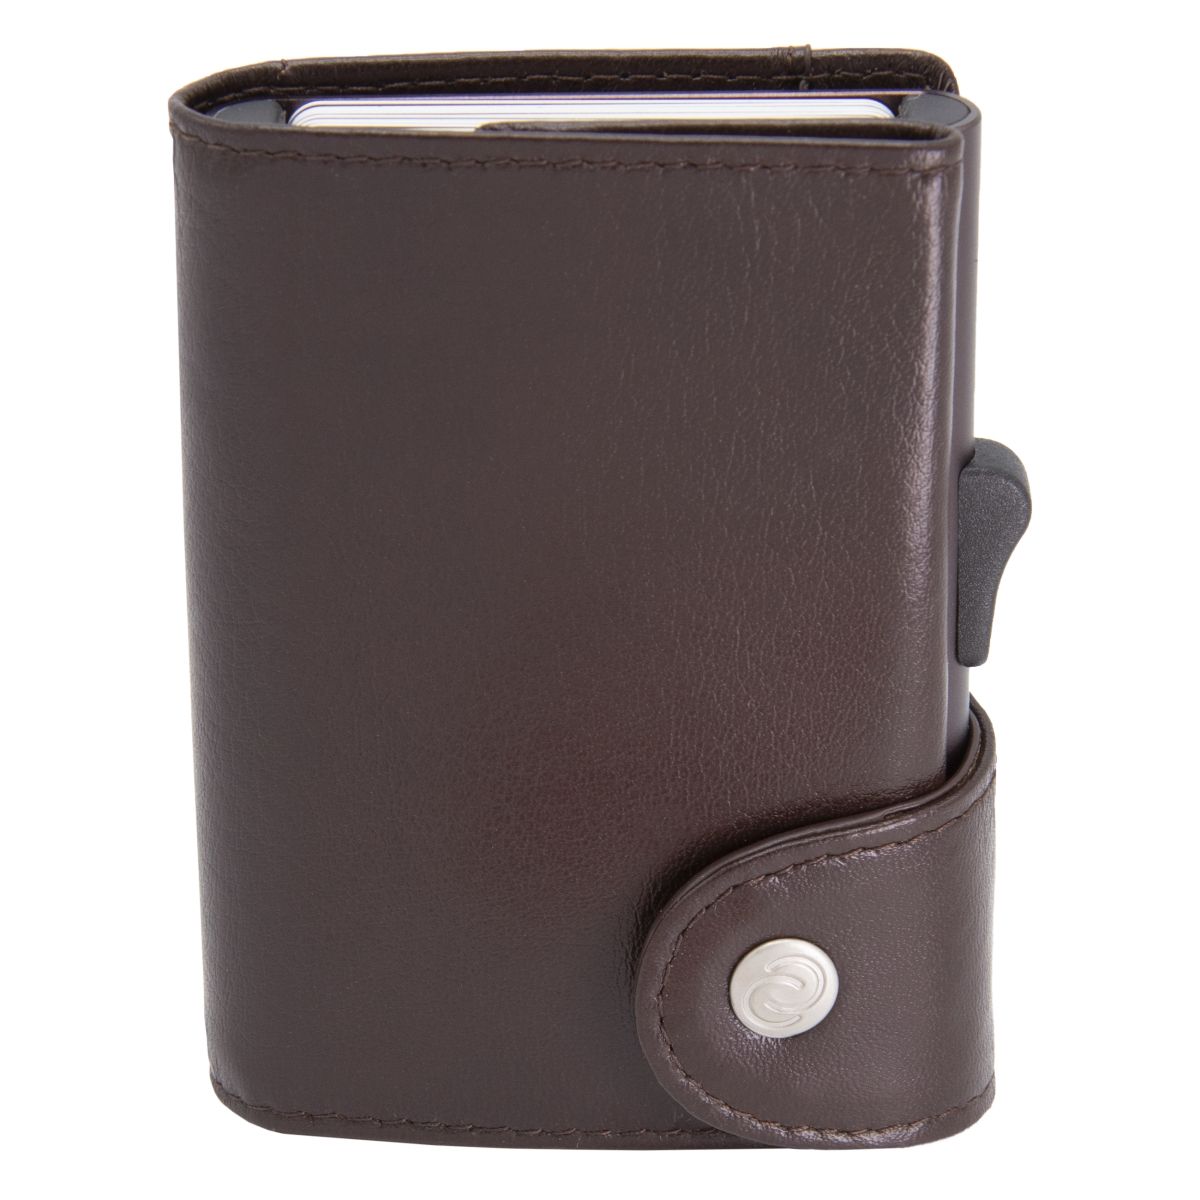 C-Secure XL Aluminum Wallet with Genuine Leather and Coins Pocket - Mogano Brown